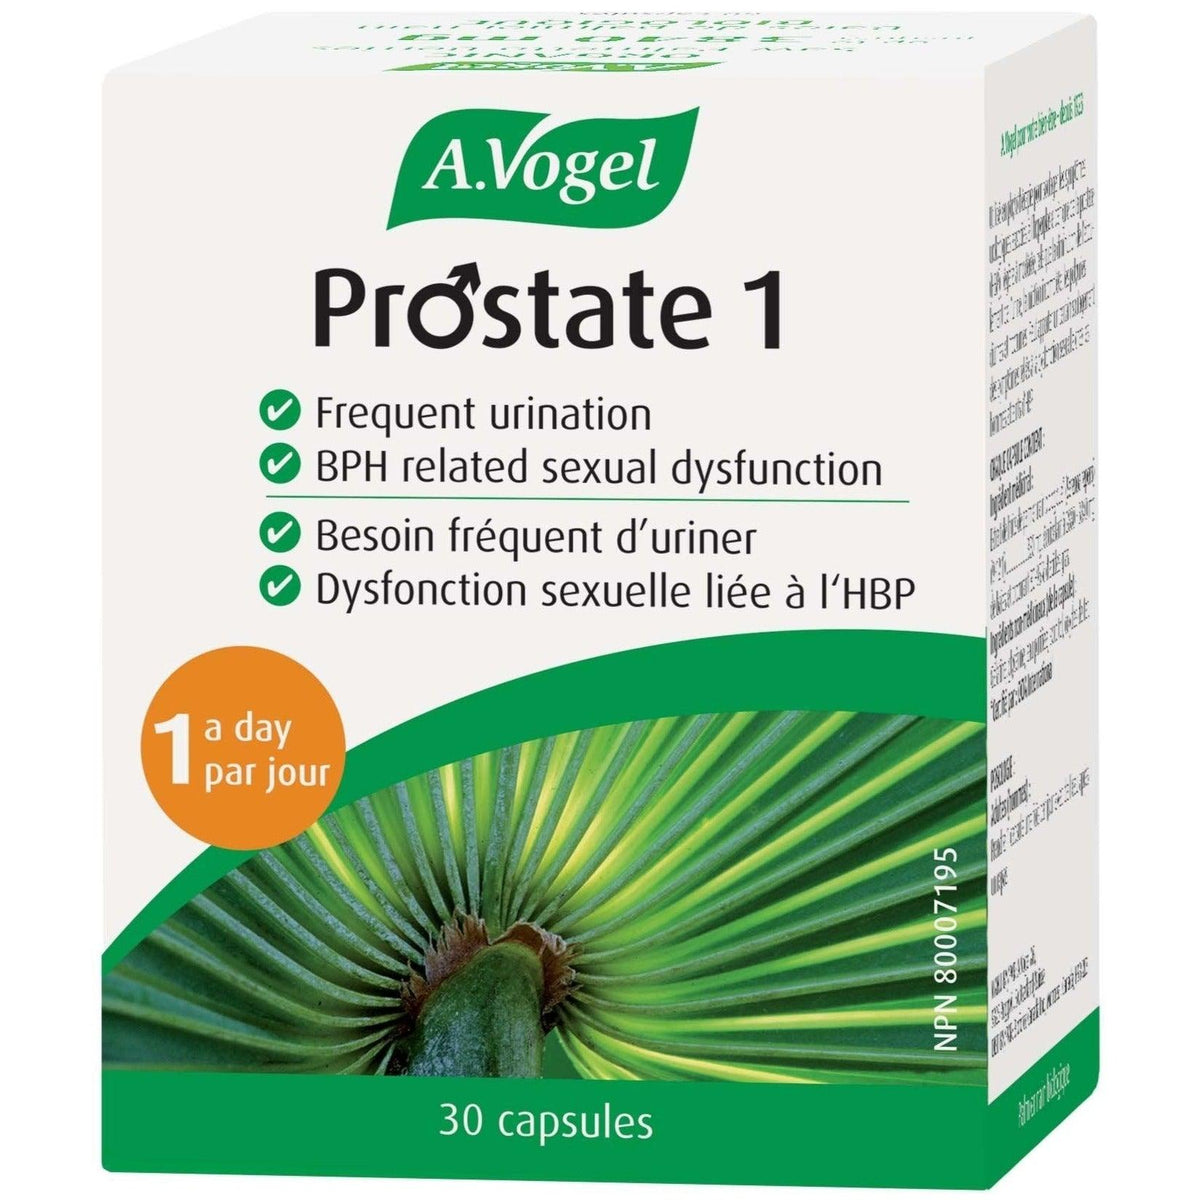 A. Vogel Prostate 1 30/60 Capsules Supplements - Prostate at Village Vitamin Store